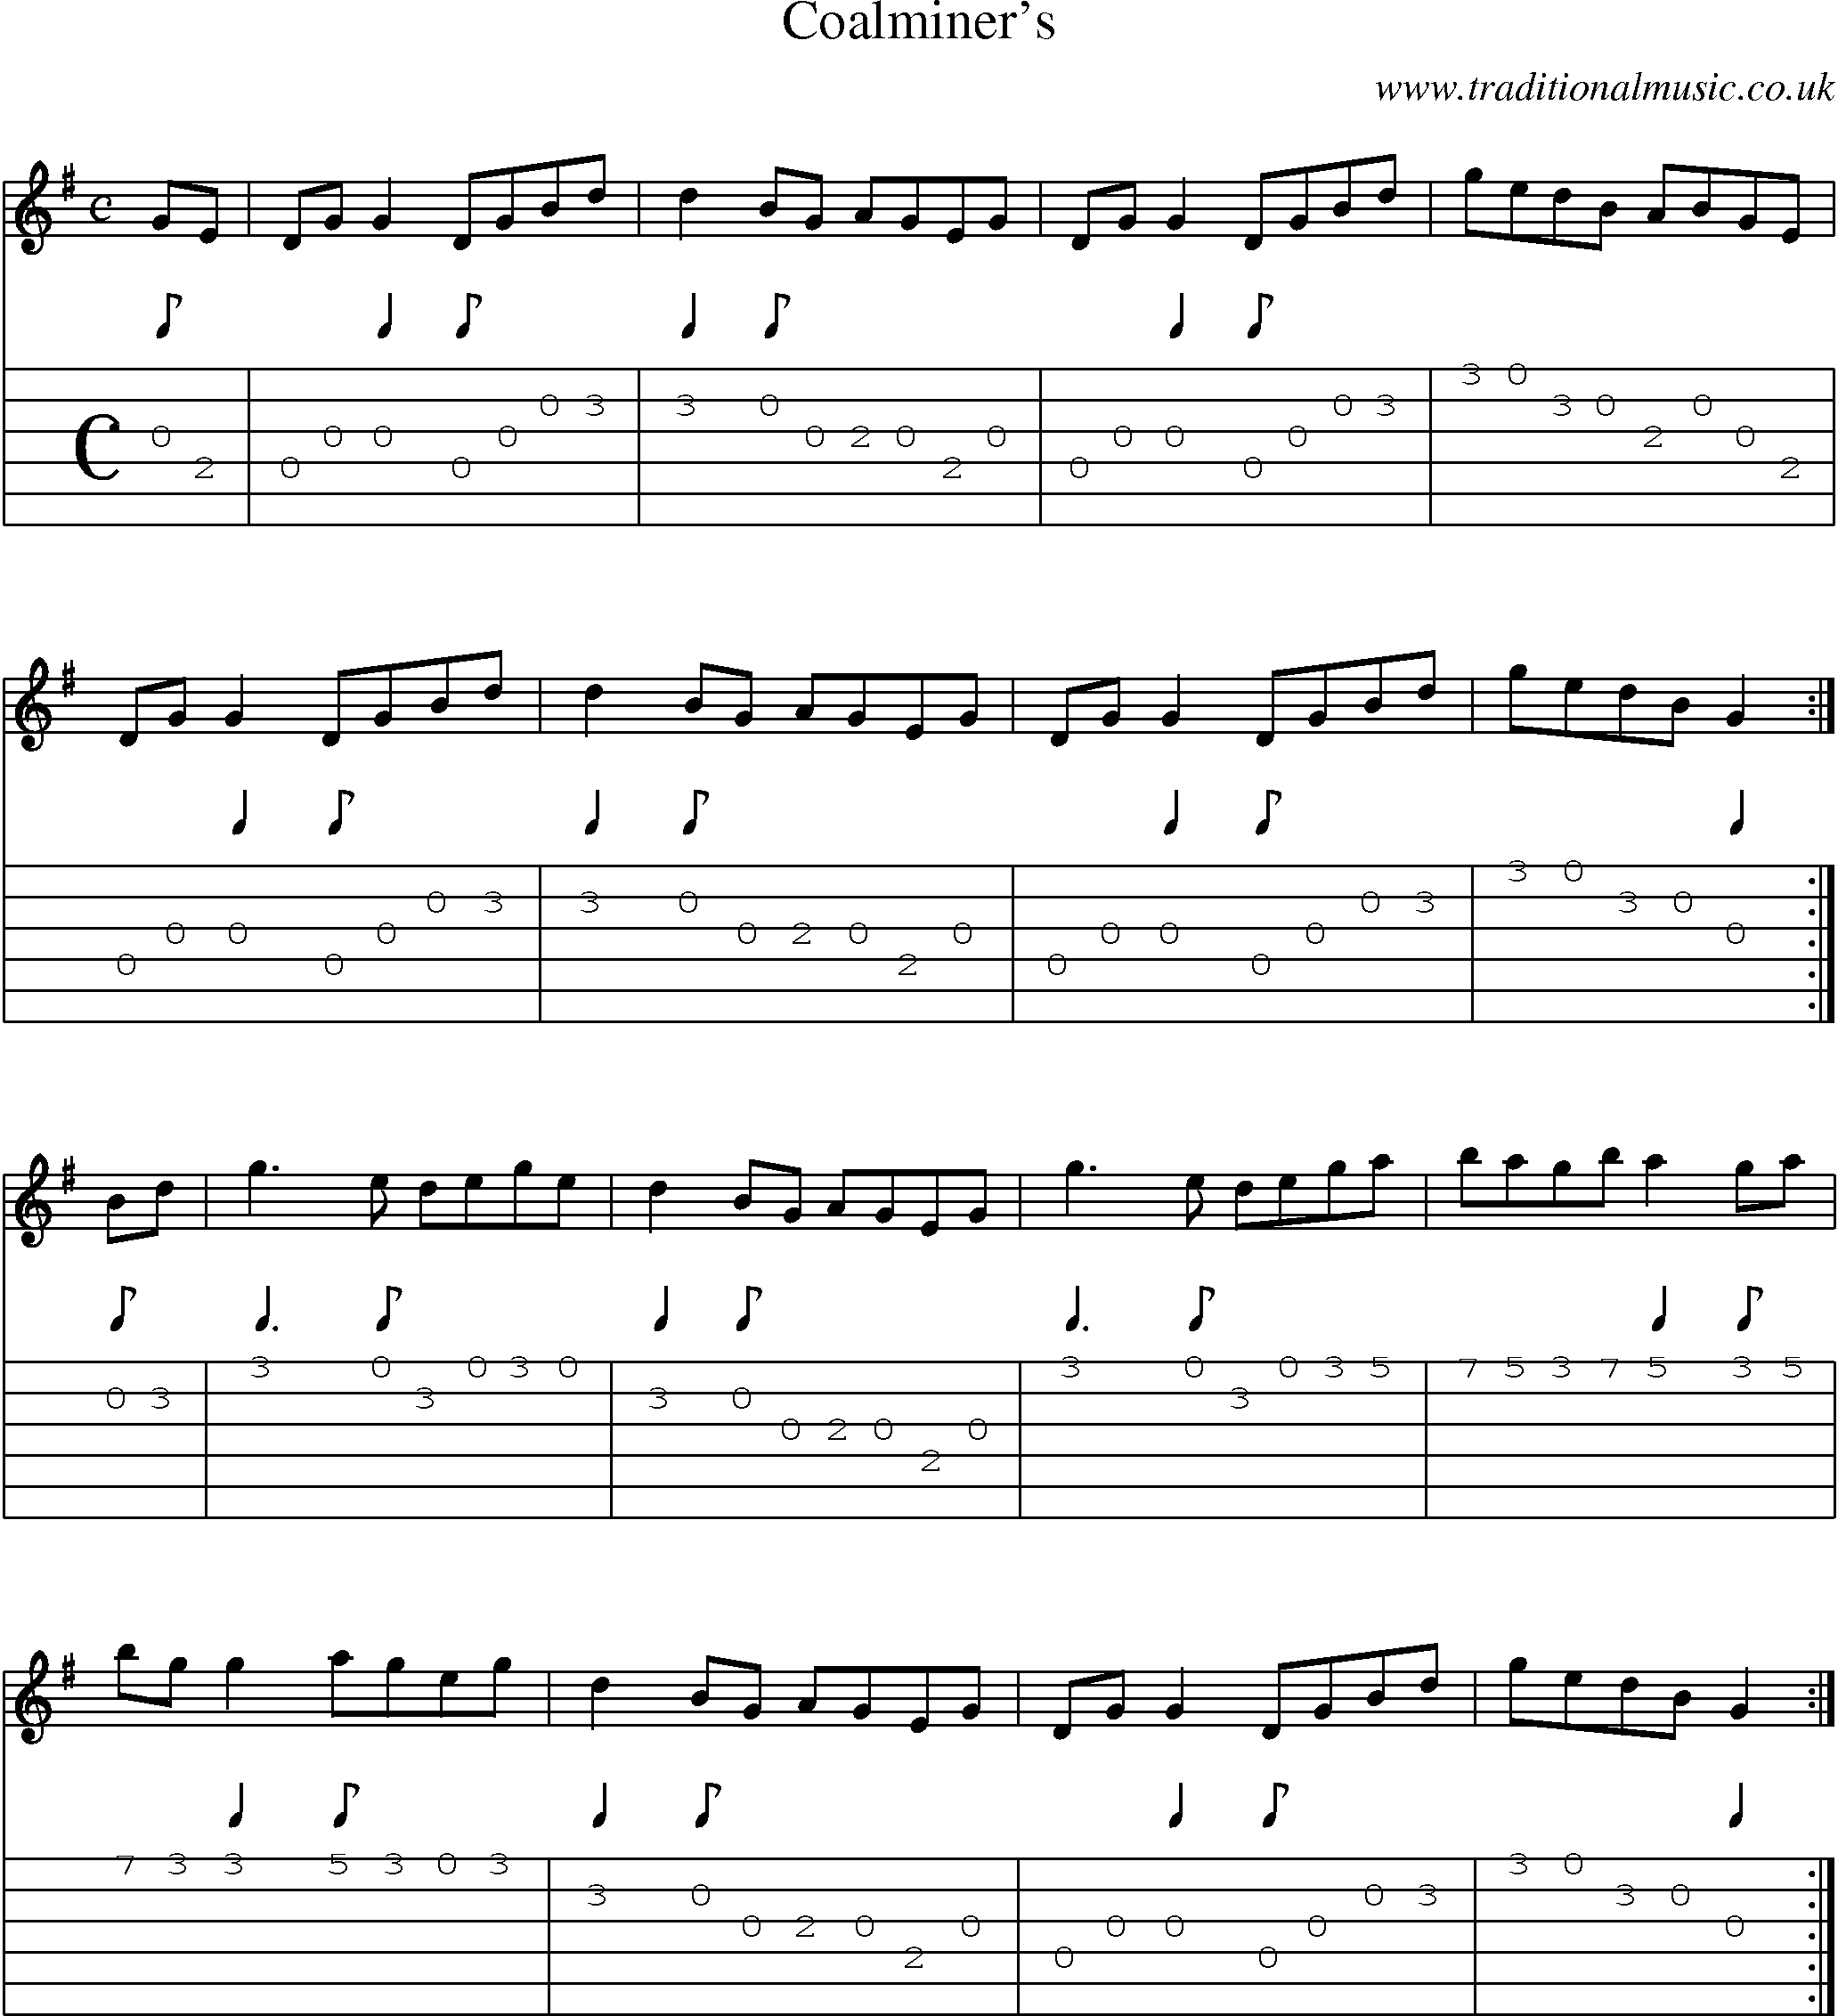 Music Score and Guitar Tabs for Coalminers